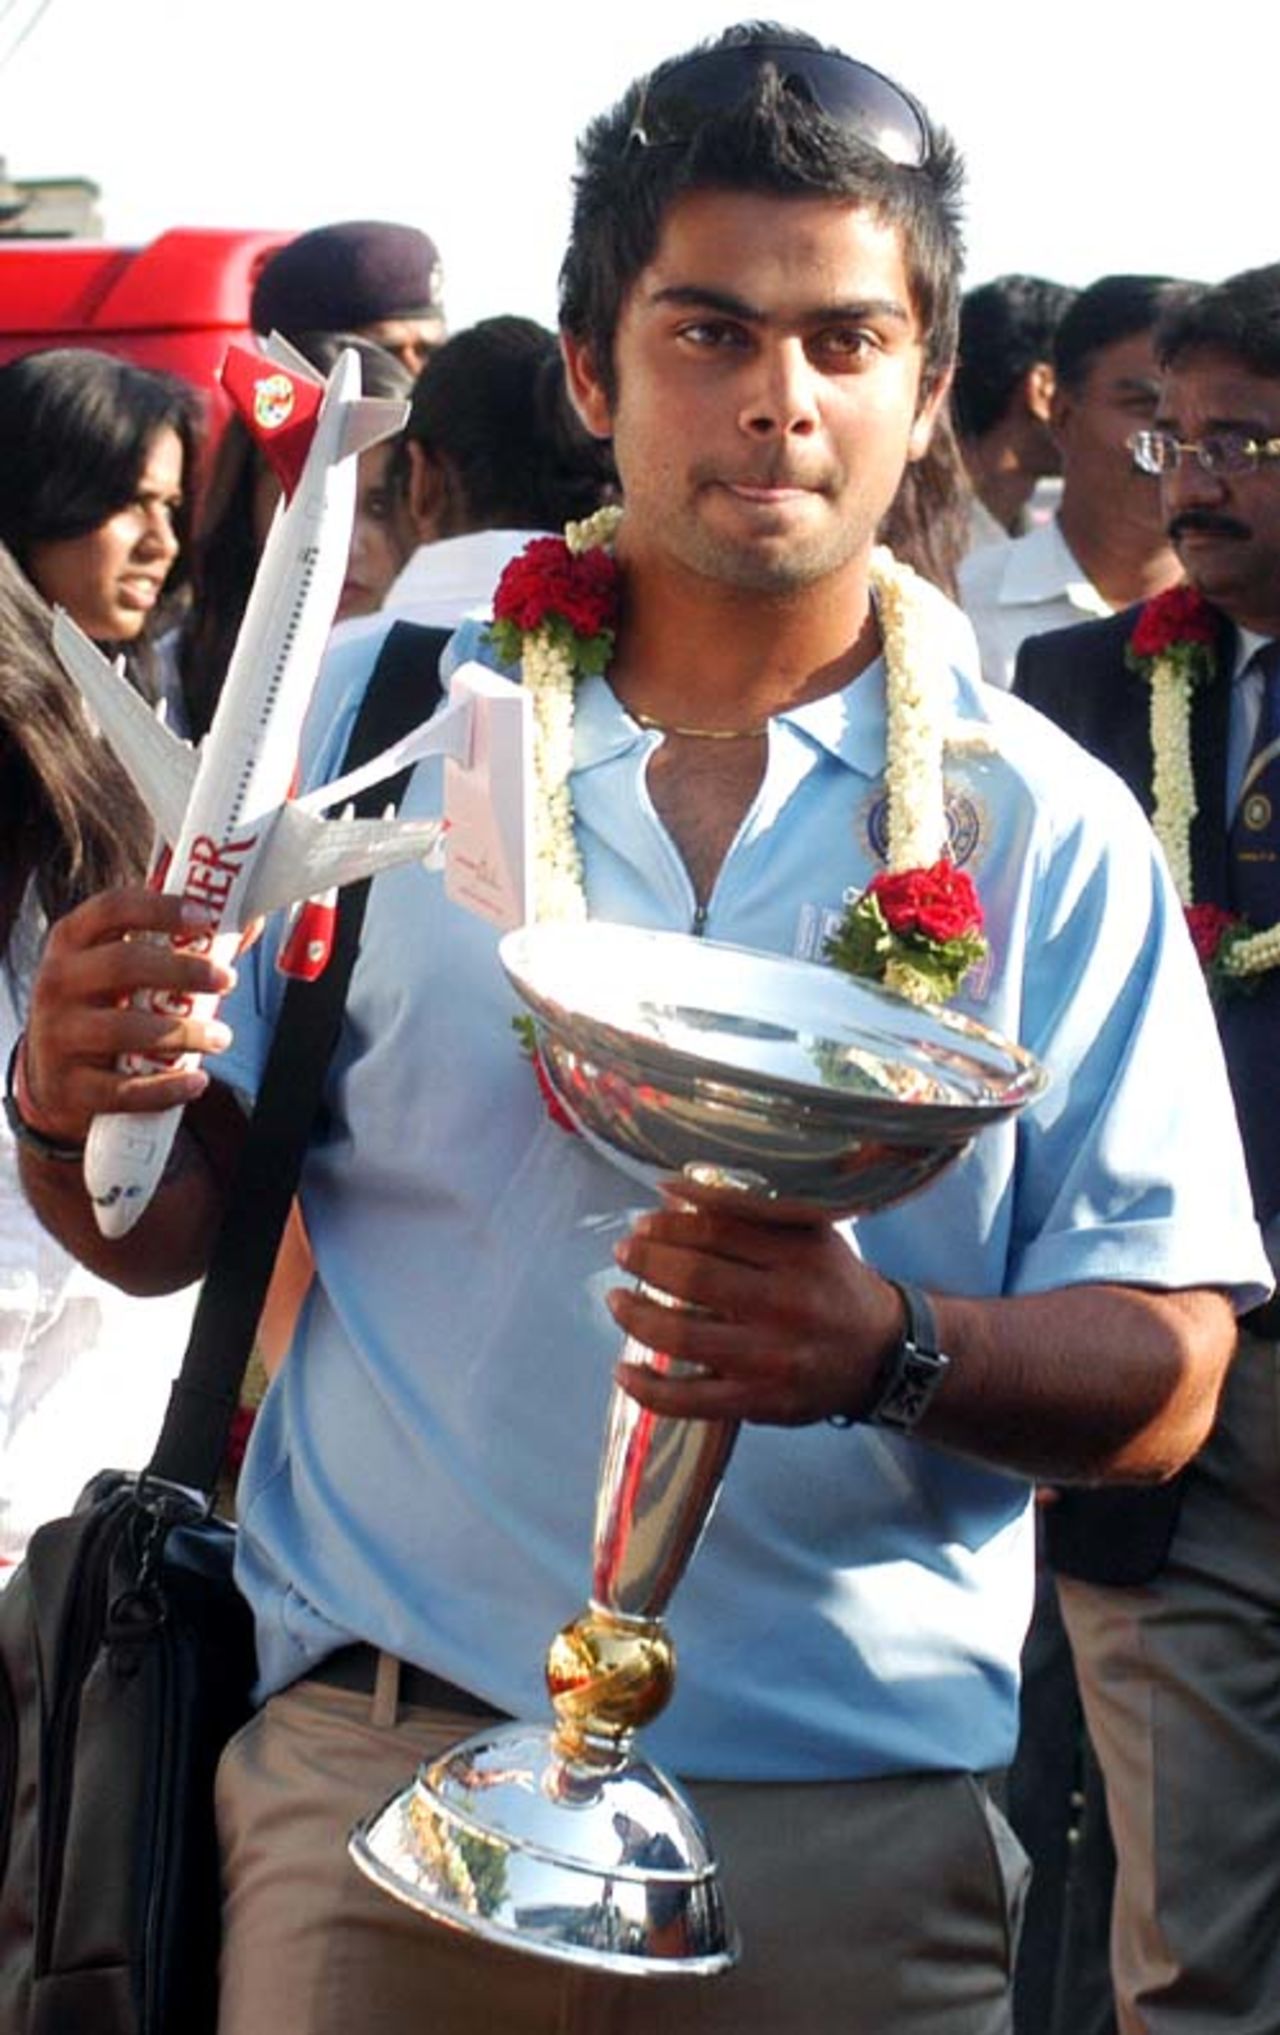 Virat Kohli, the India Under-19 captain, returned with the team following their successful campaign in the World Cup in Malaysia, March 4, 2008